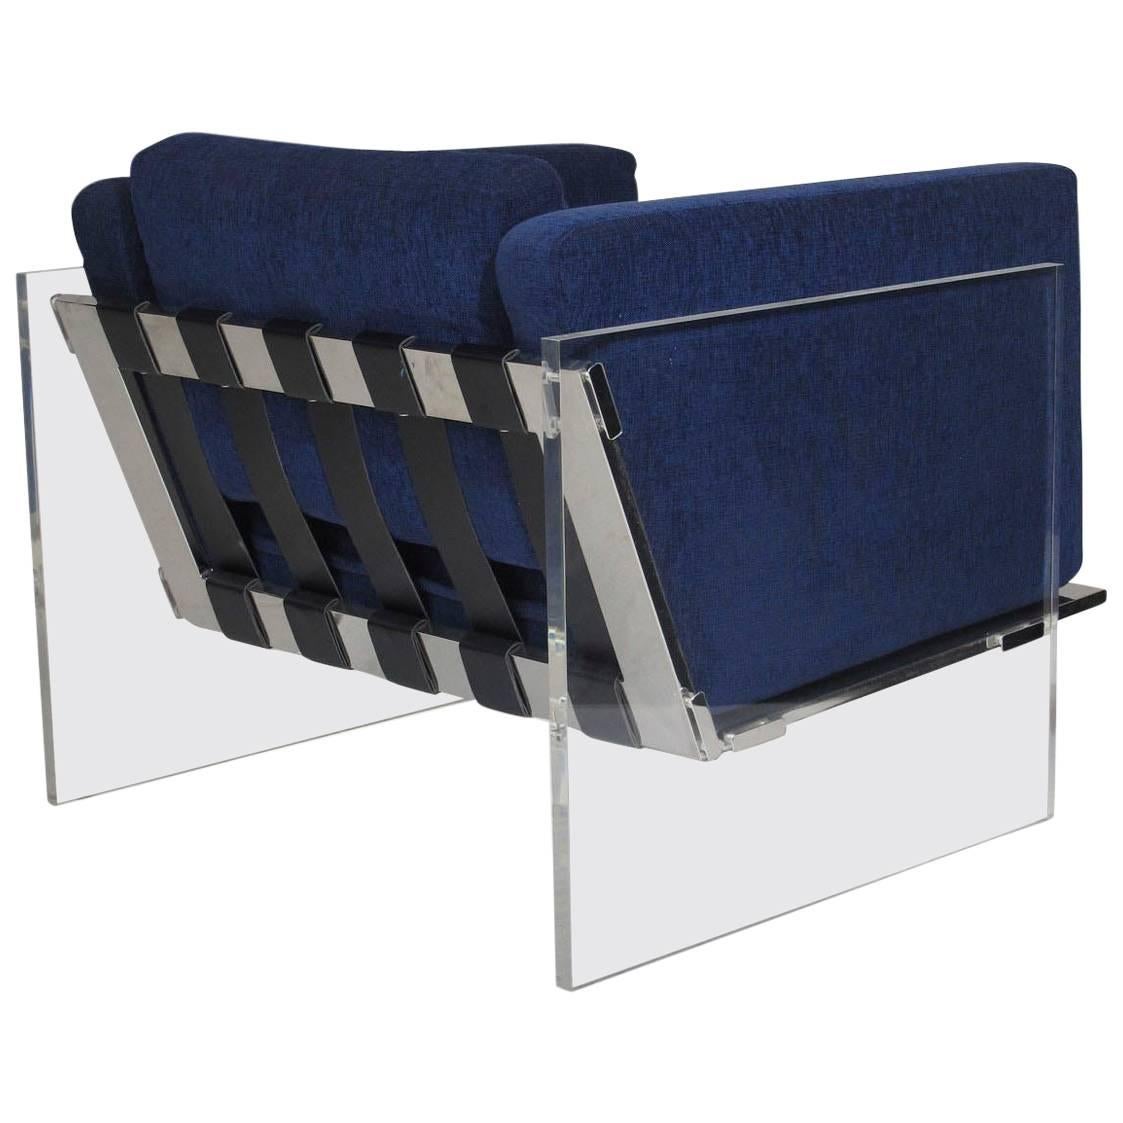 Milo Baughman for Thayer Coggin Lucite Chrome Lounge Chair in Navy